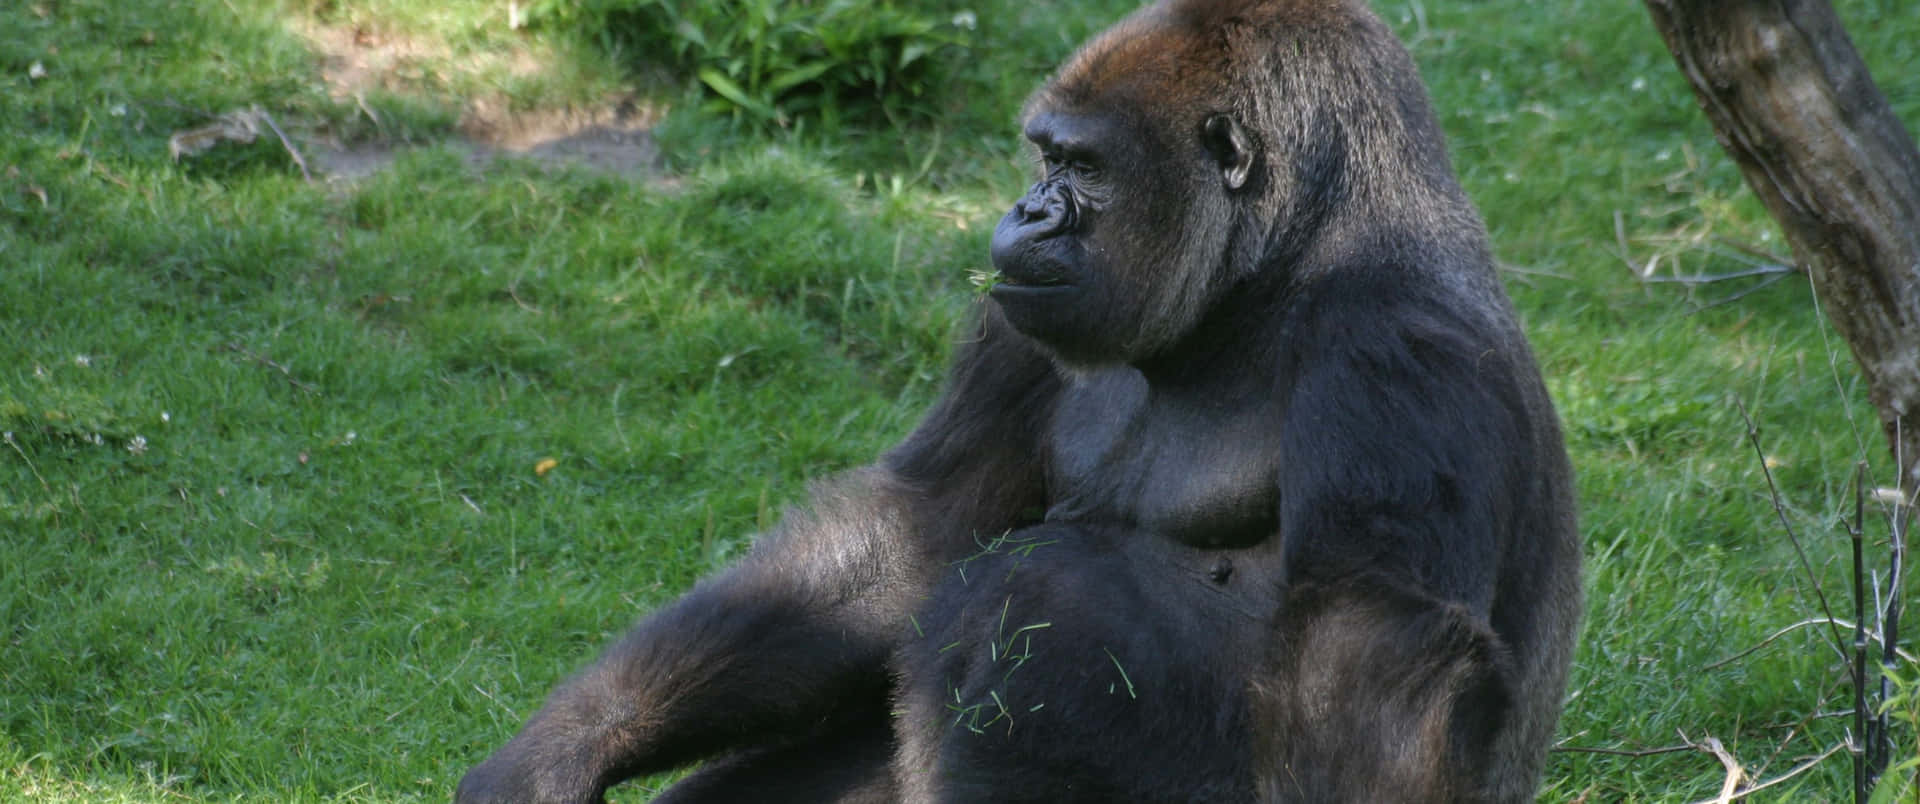 3440x1440p Gorilla With Grass In Its Mouth Background